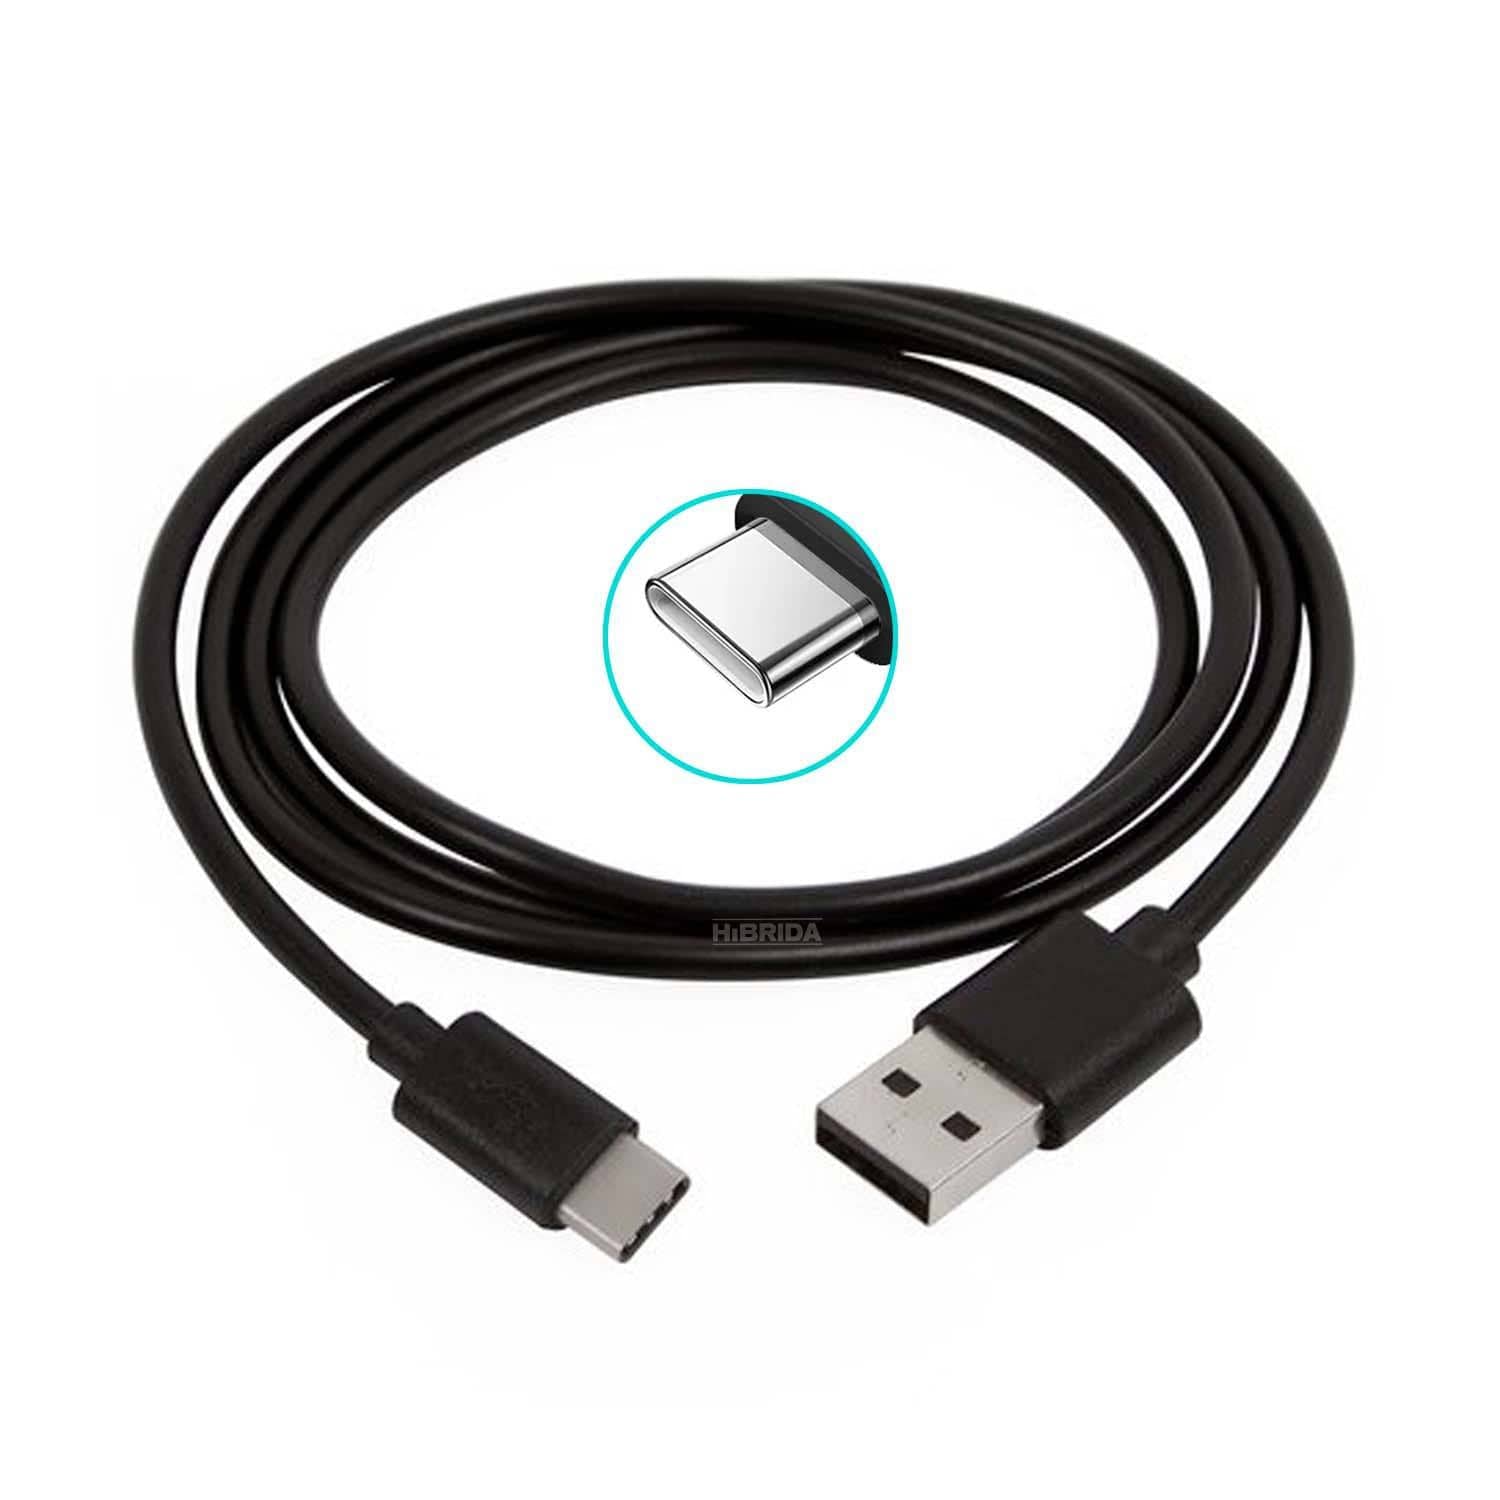 Rexton 13A Extension Cable With USB Port | Supply Master | Accra, Ghana Power Management & Protection Buy Tools hardware Building materials